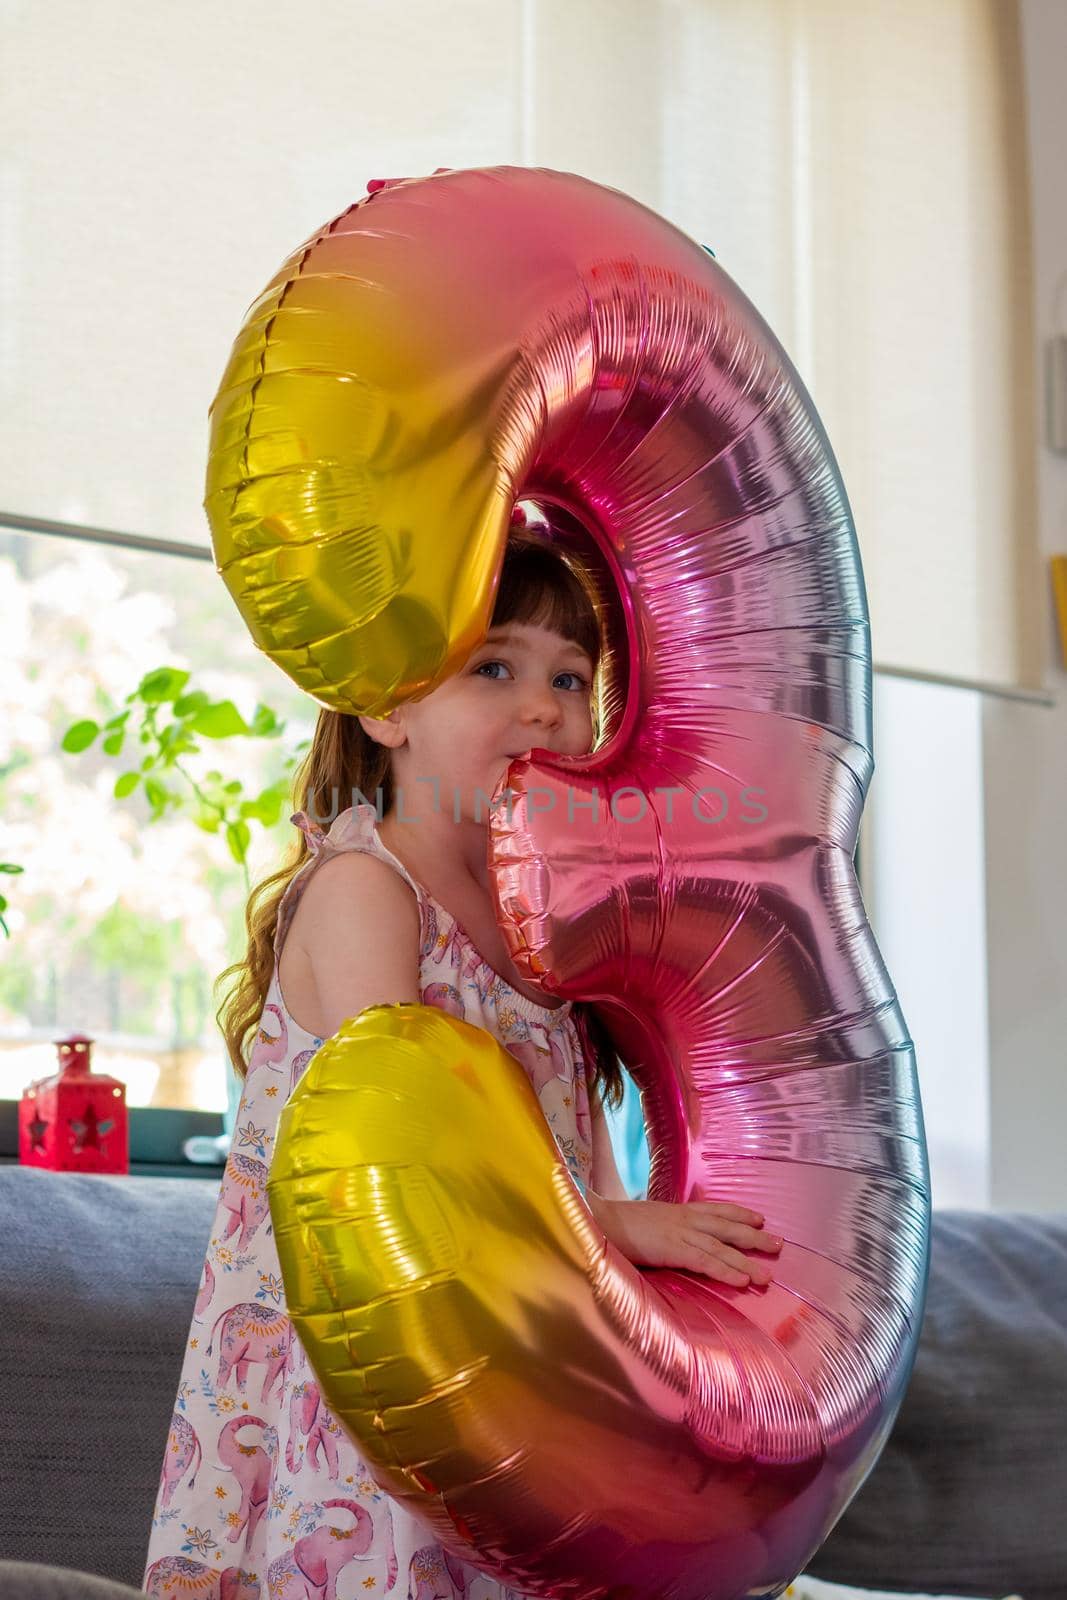 A Cute Baby Girl Holding A Number Three Balloon by AlbertoPascual